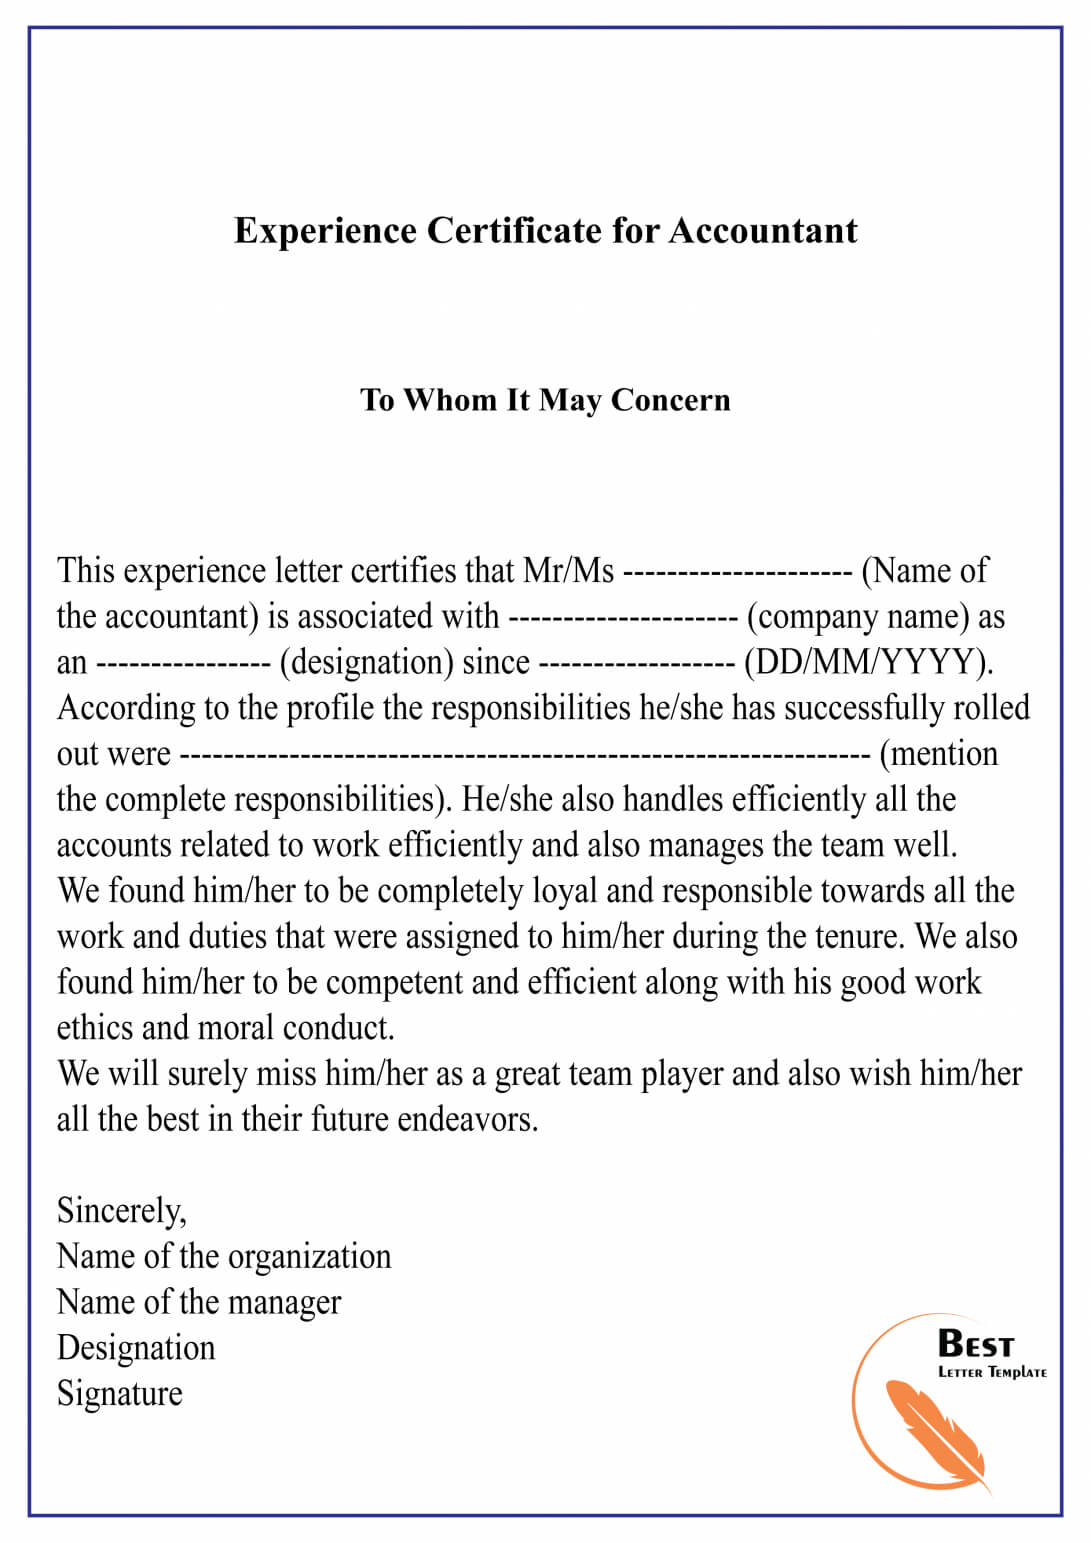 Sample Experience Certificate Format For Accountant 01 Best Regarding Certificate Of Experience Template